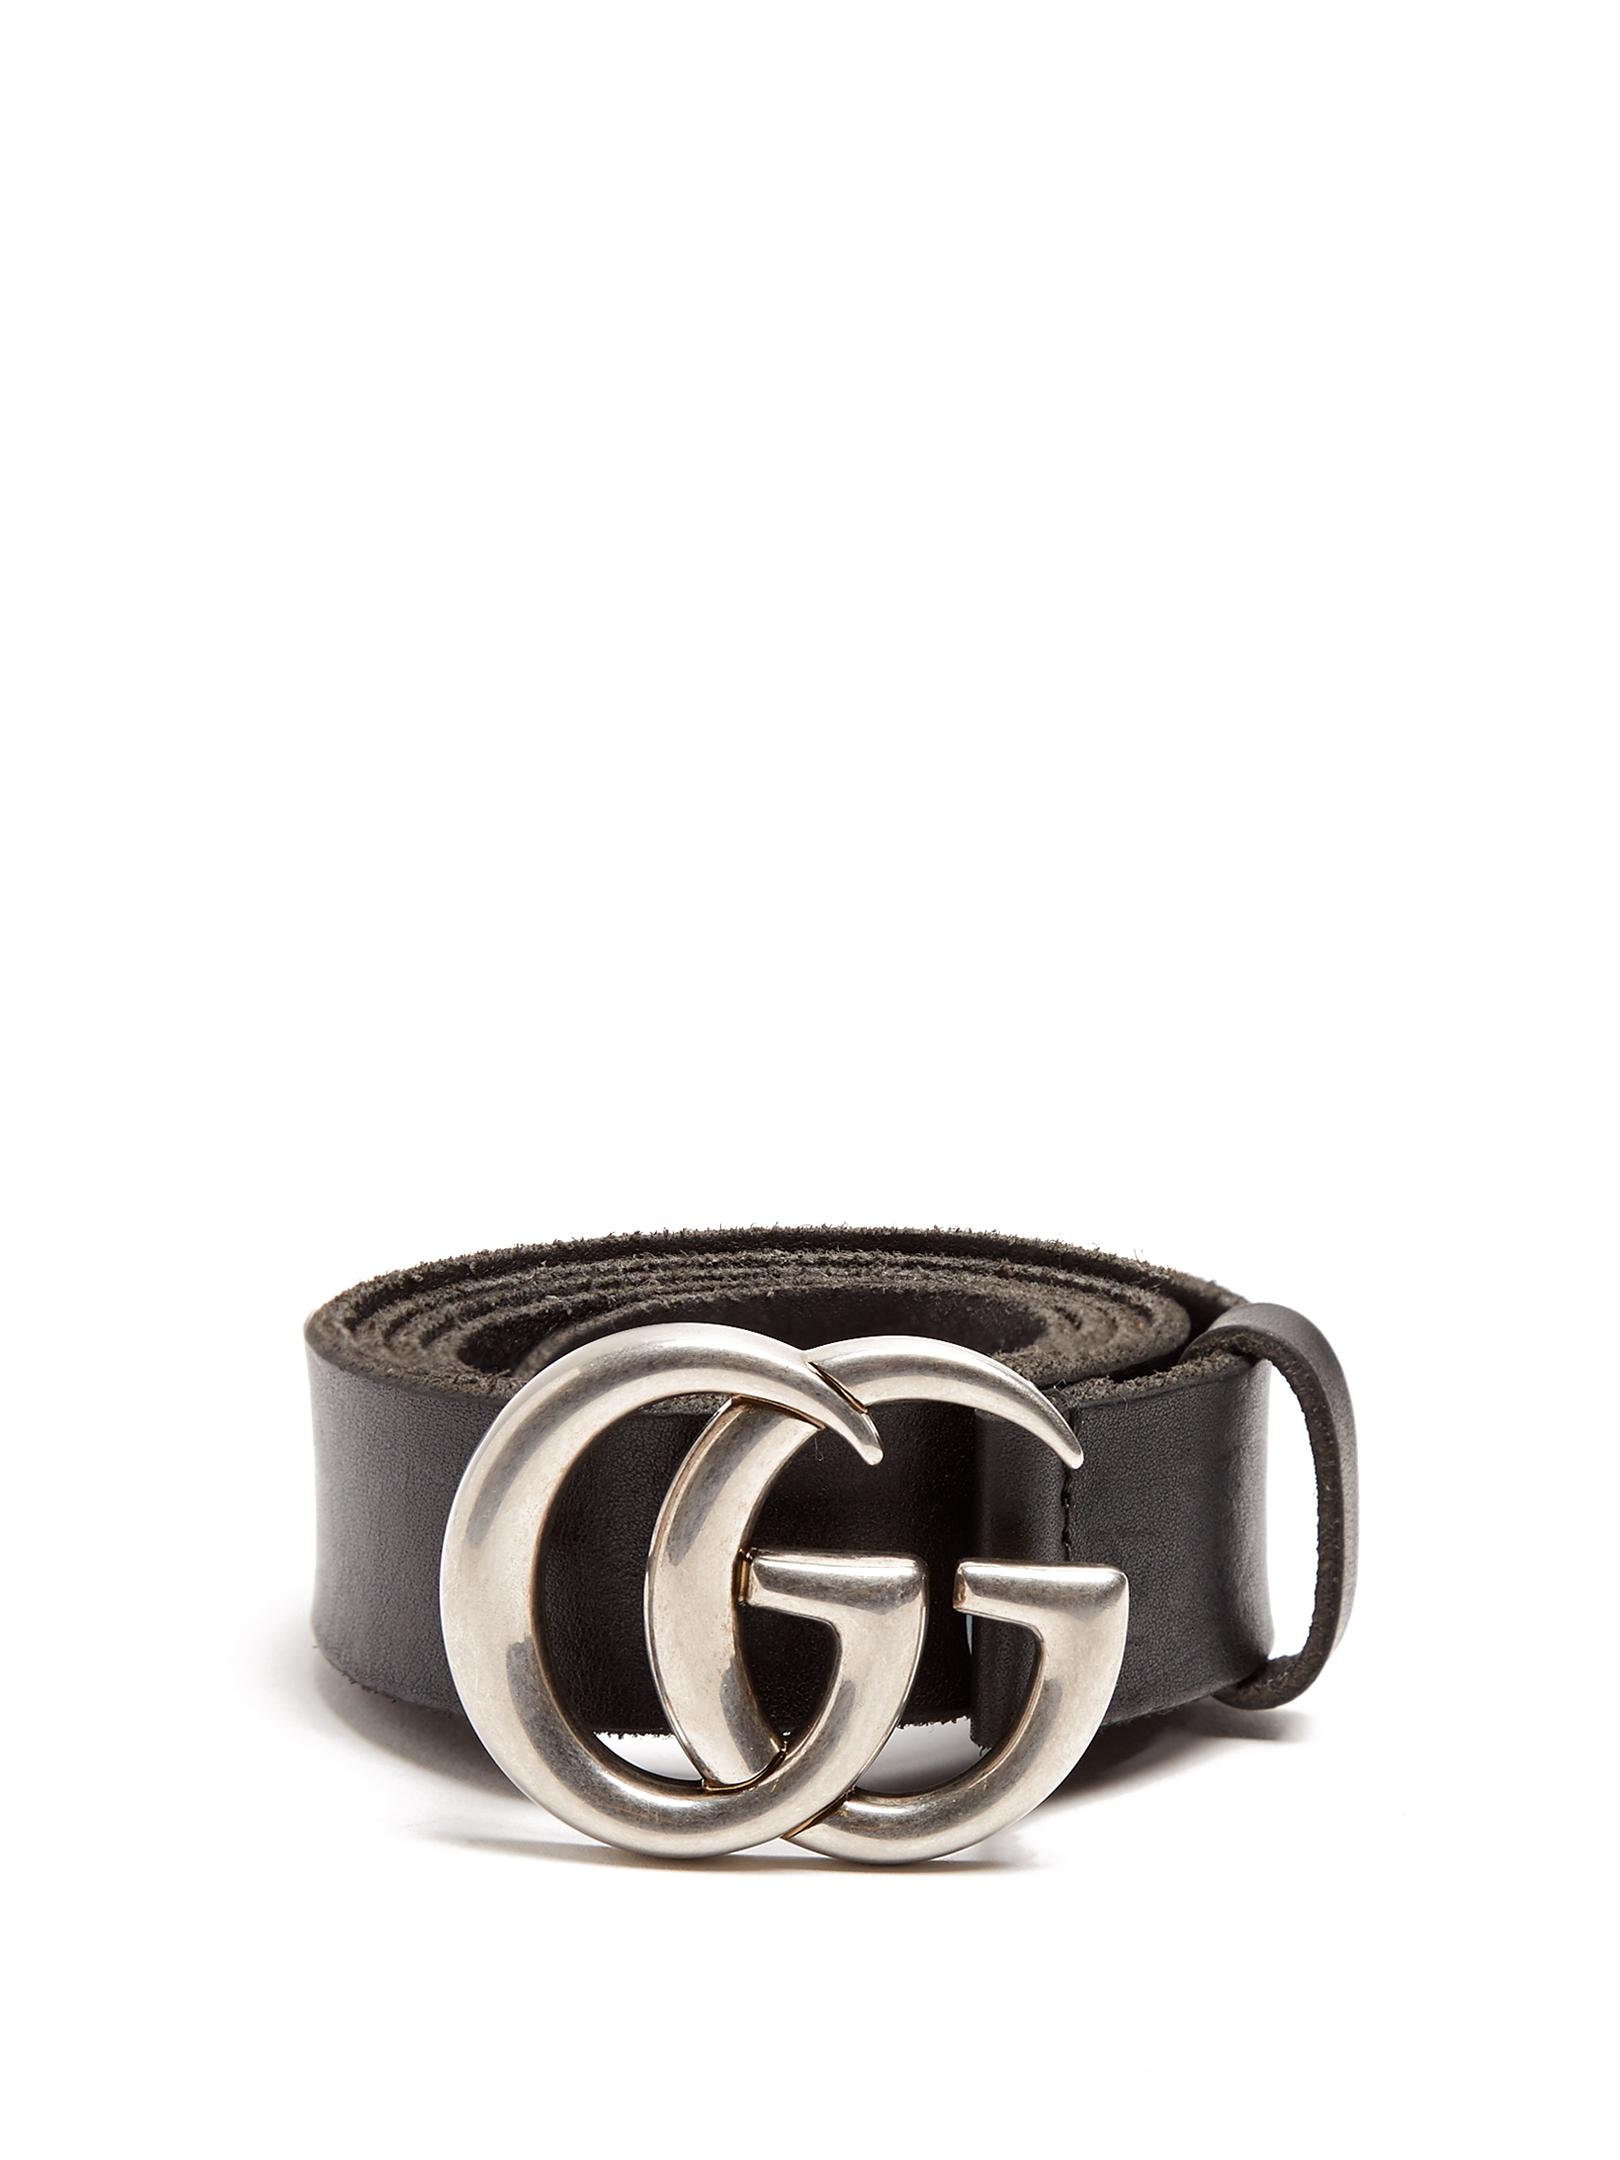 gucci marmont belt silver buckle